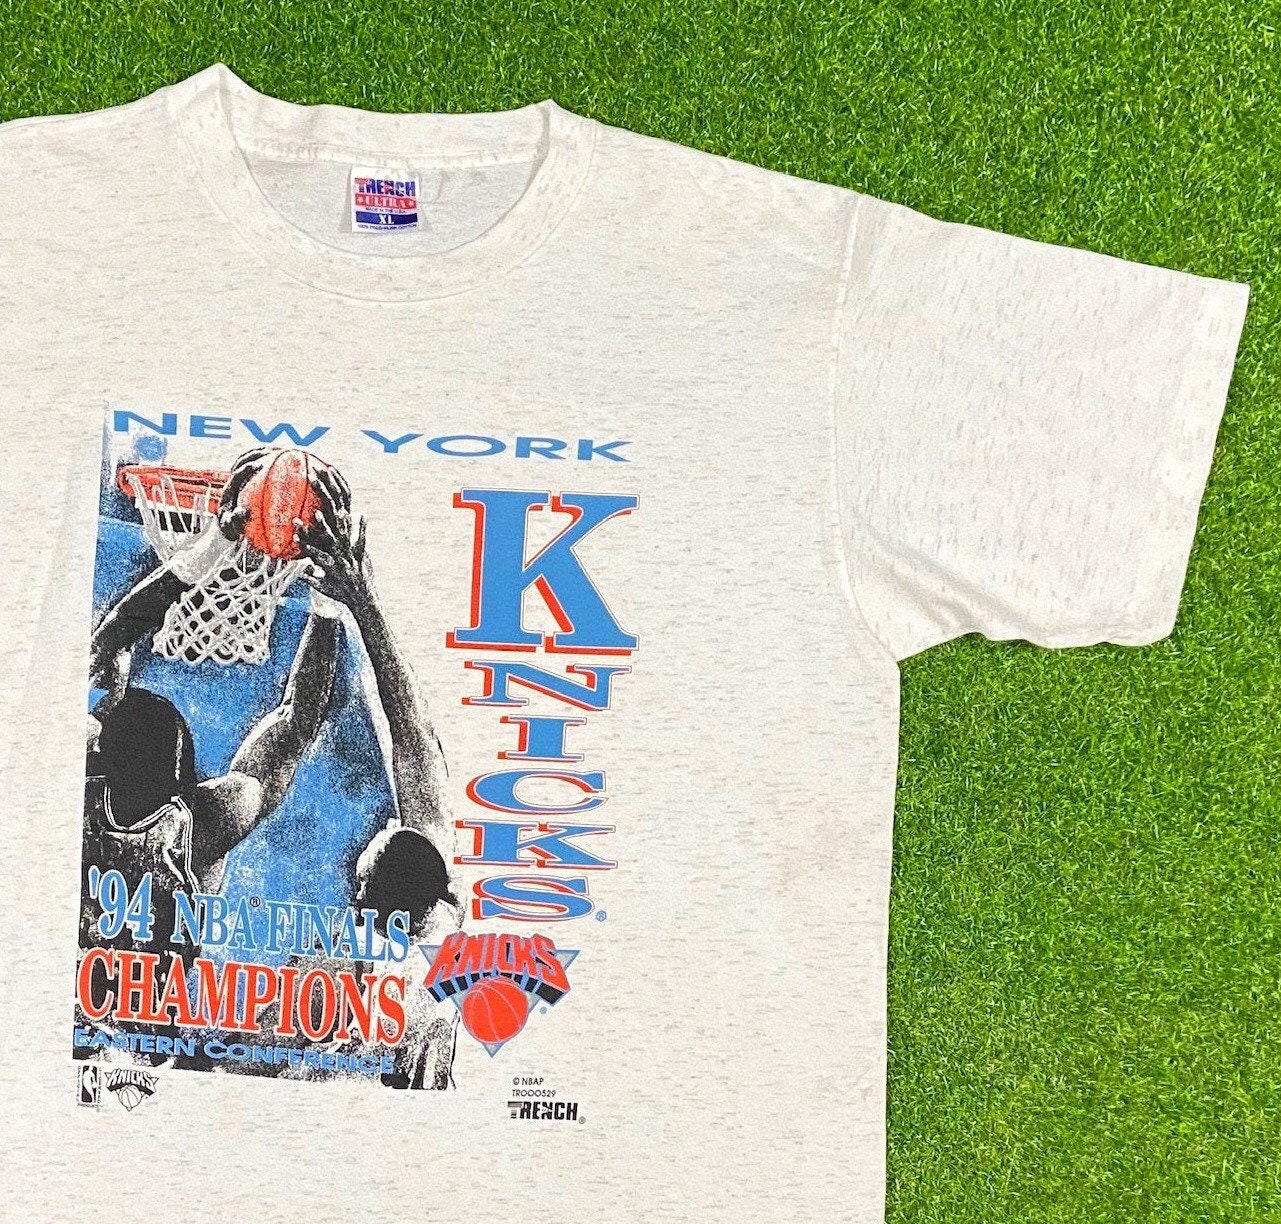 Vintage 90s New York Knicks Eastern Conference Champions 